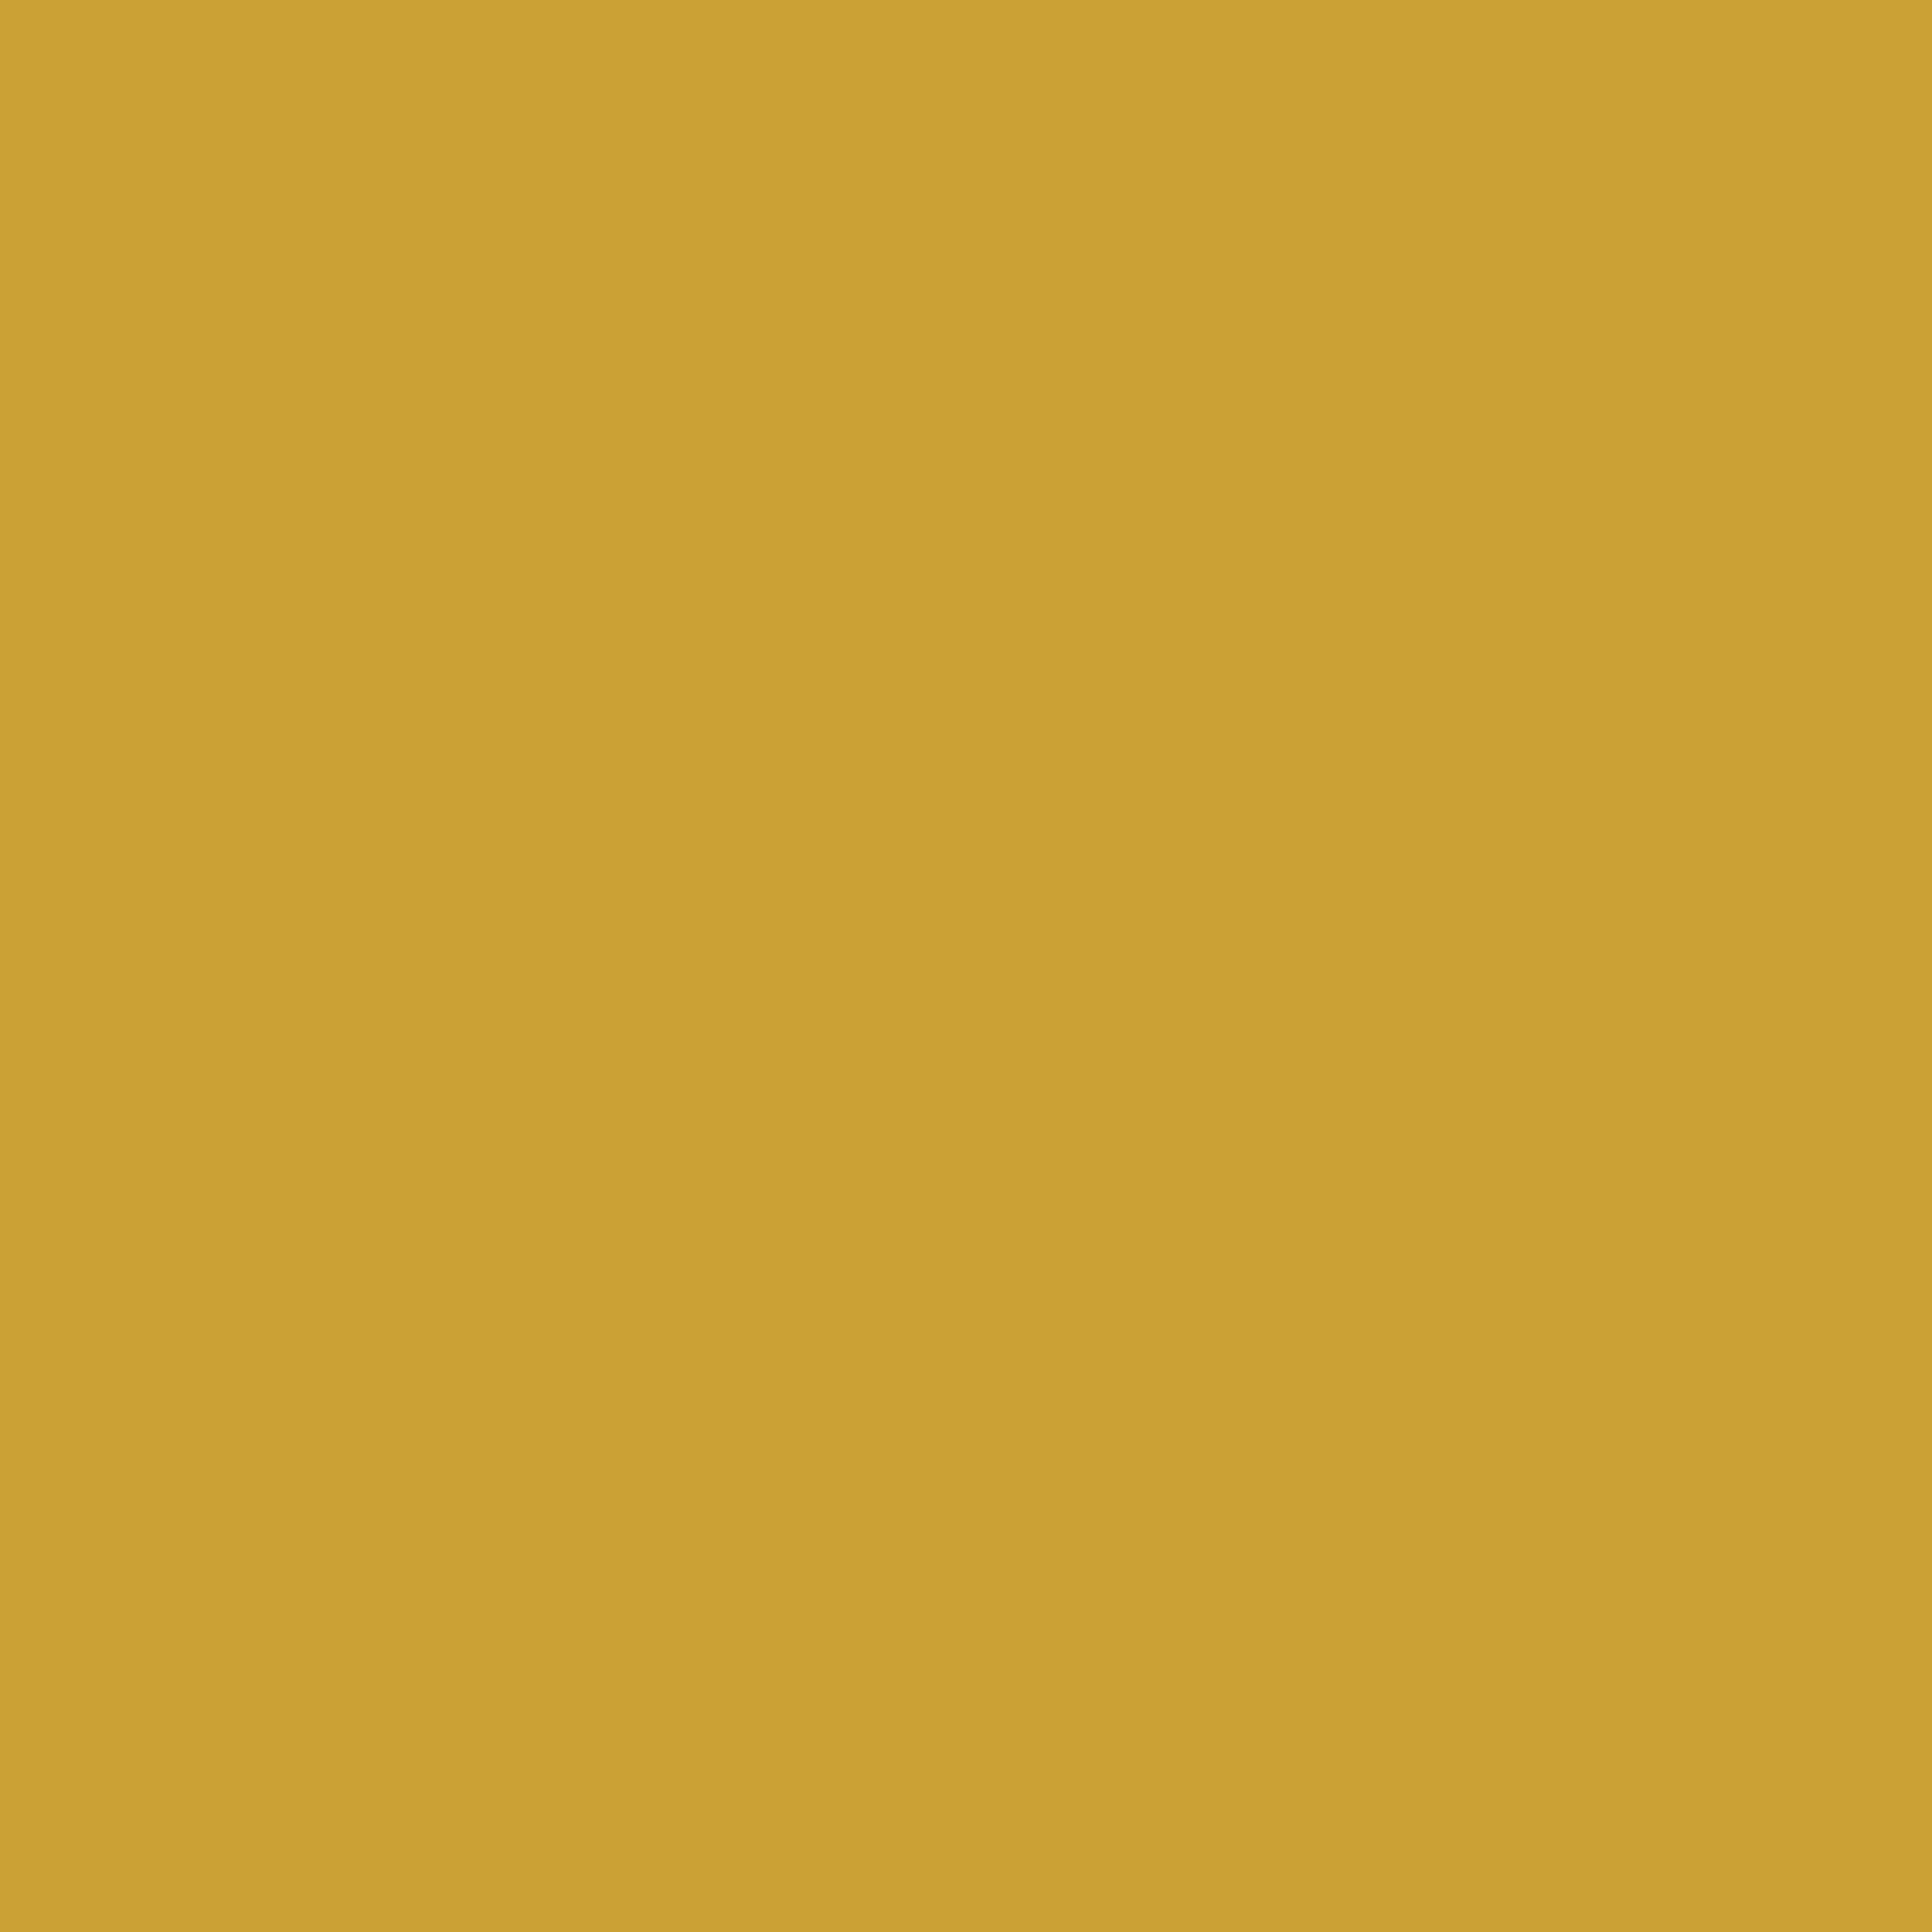 2048x2048 Satin Sheen Gold Solid Color Background